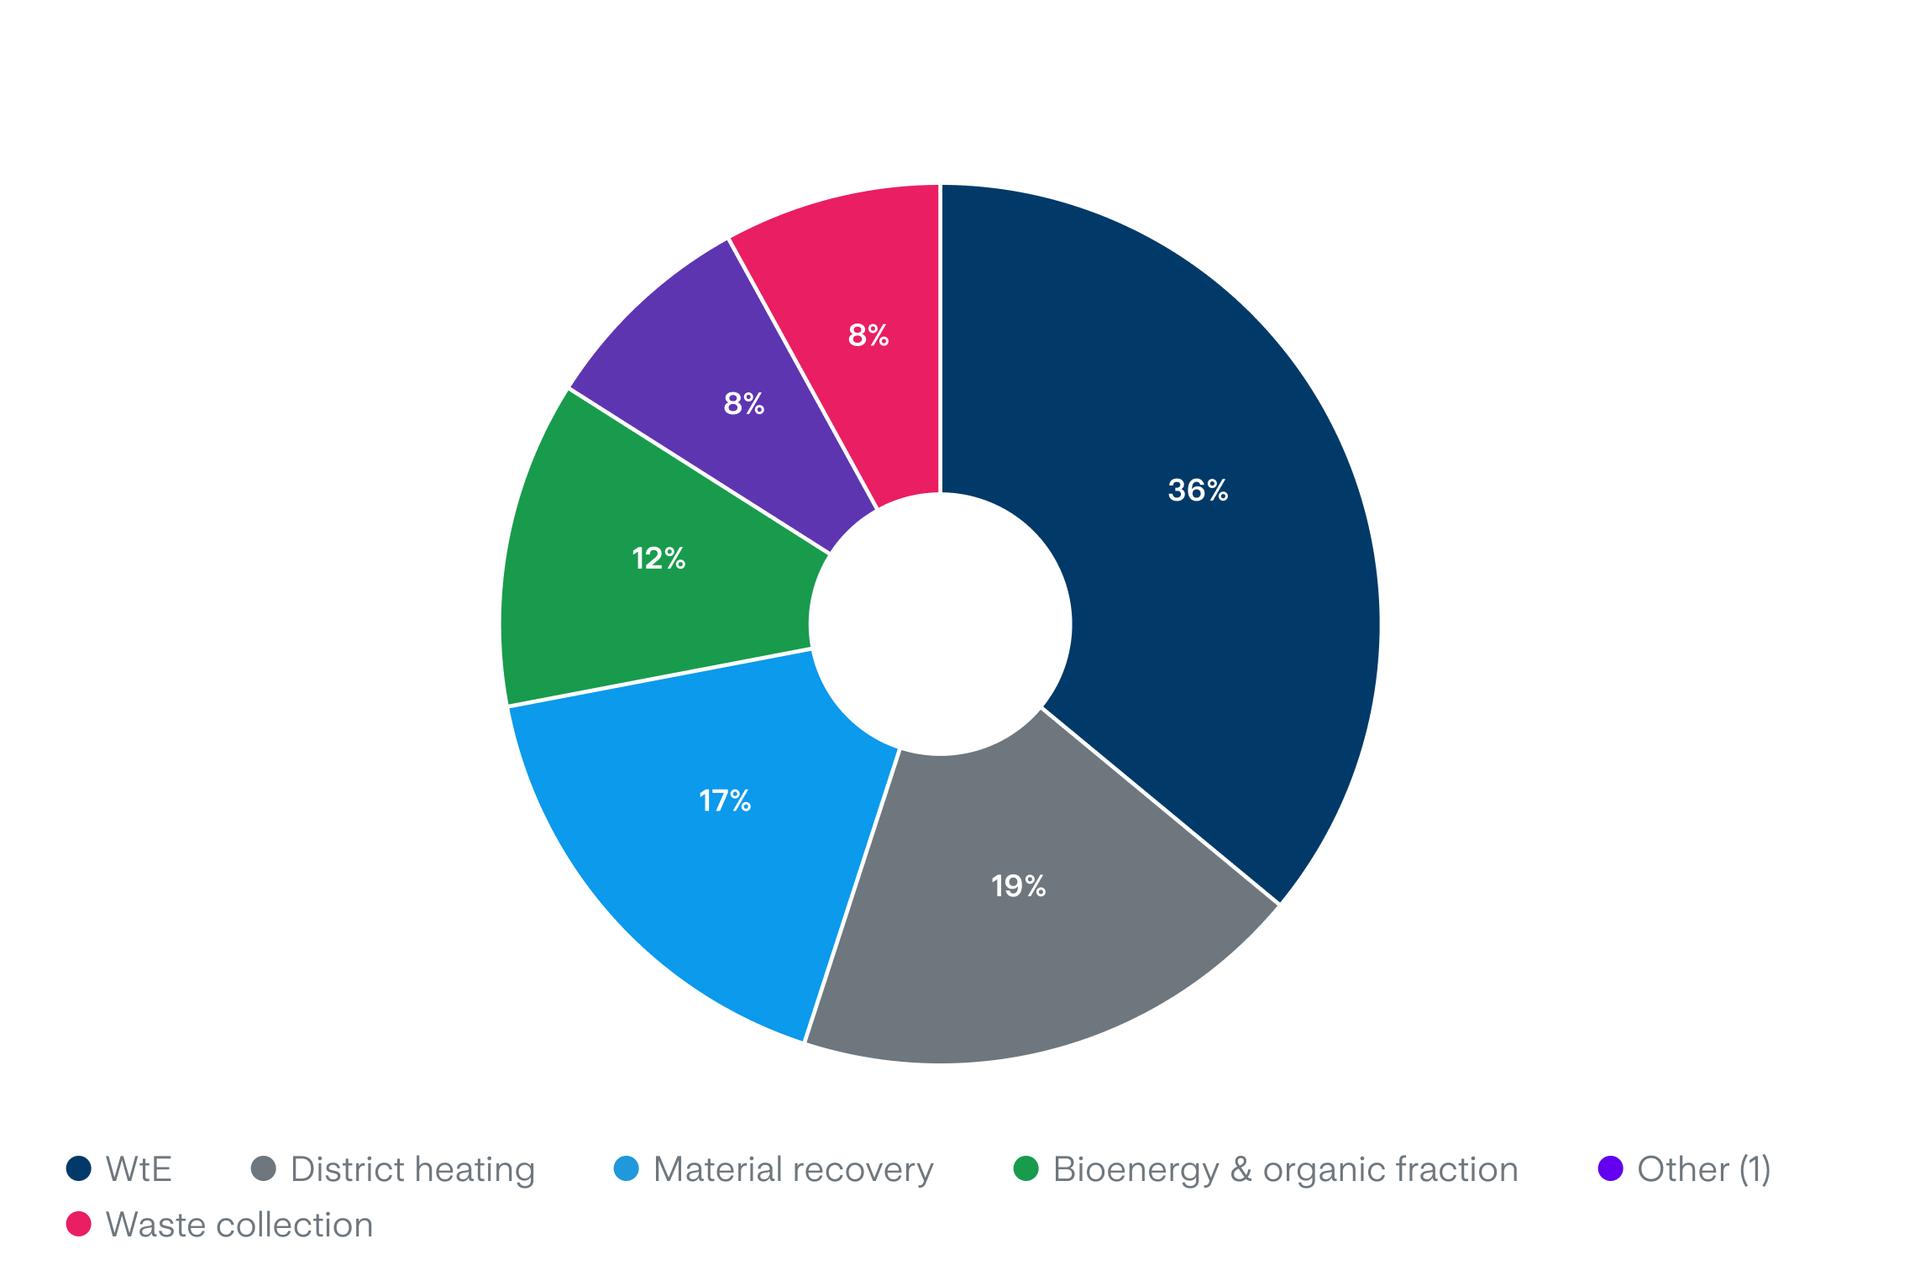 The pie chart shows the percentage split of the €5bn 2021-2030 circular economy investment (cumulative Capex): 36% WtE, 19% district heating, 12% bioenergies and OFMSW, 8% waste collection, 17% material recovery, 8% other (see note 1).